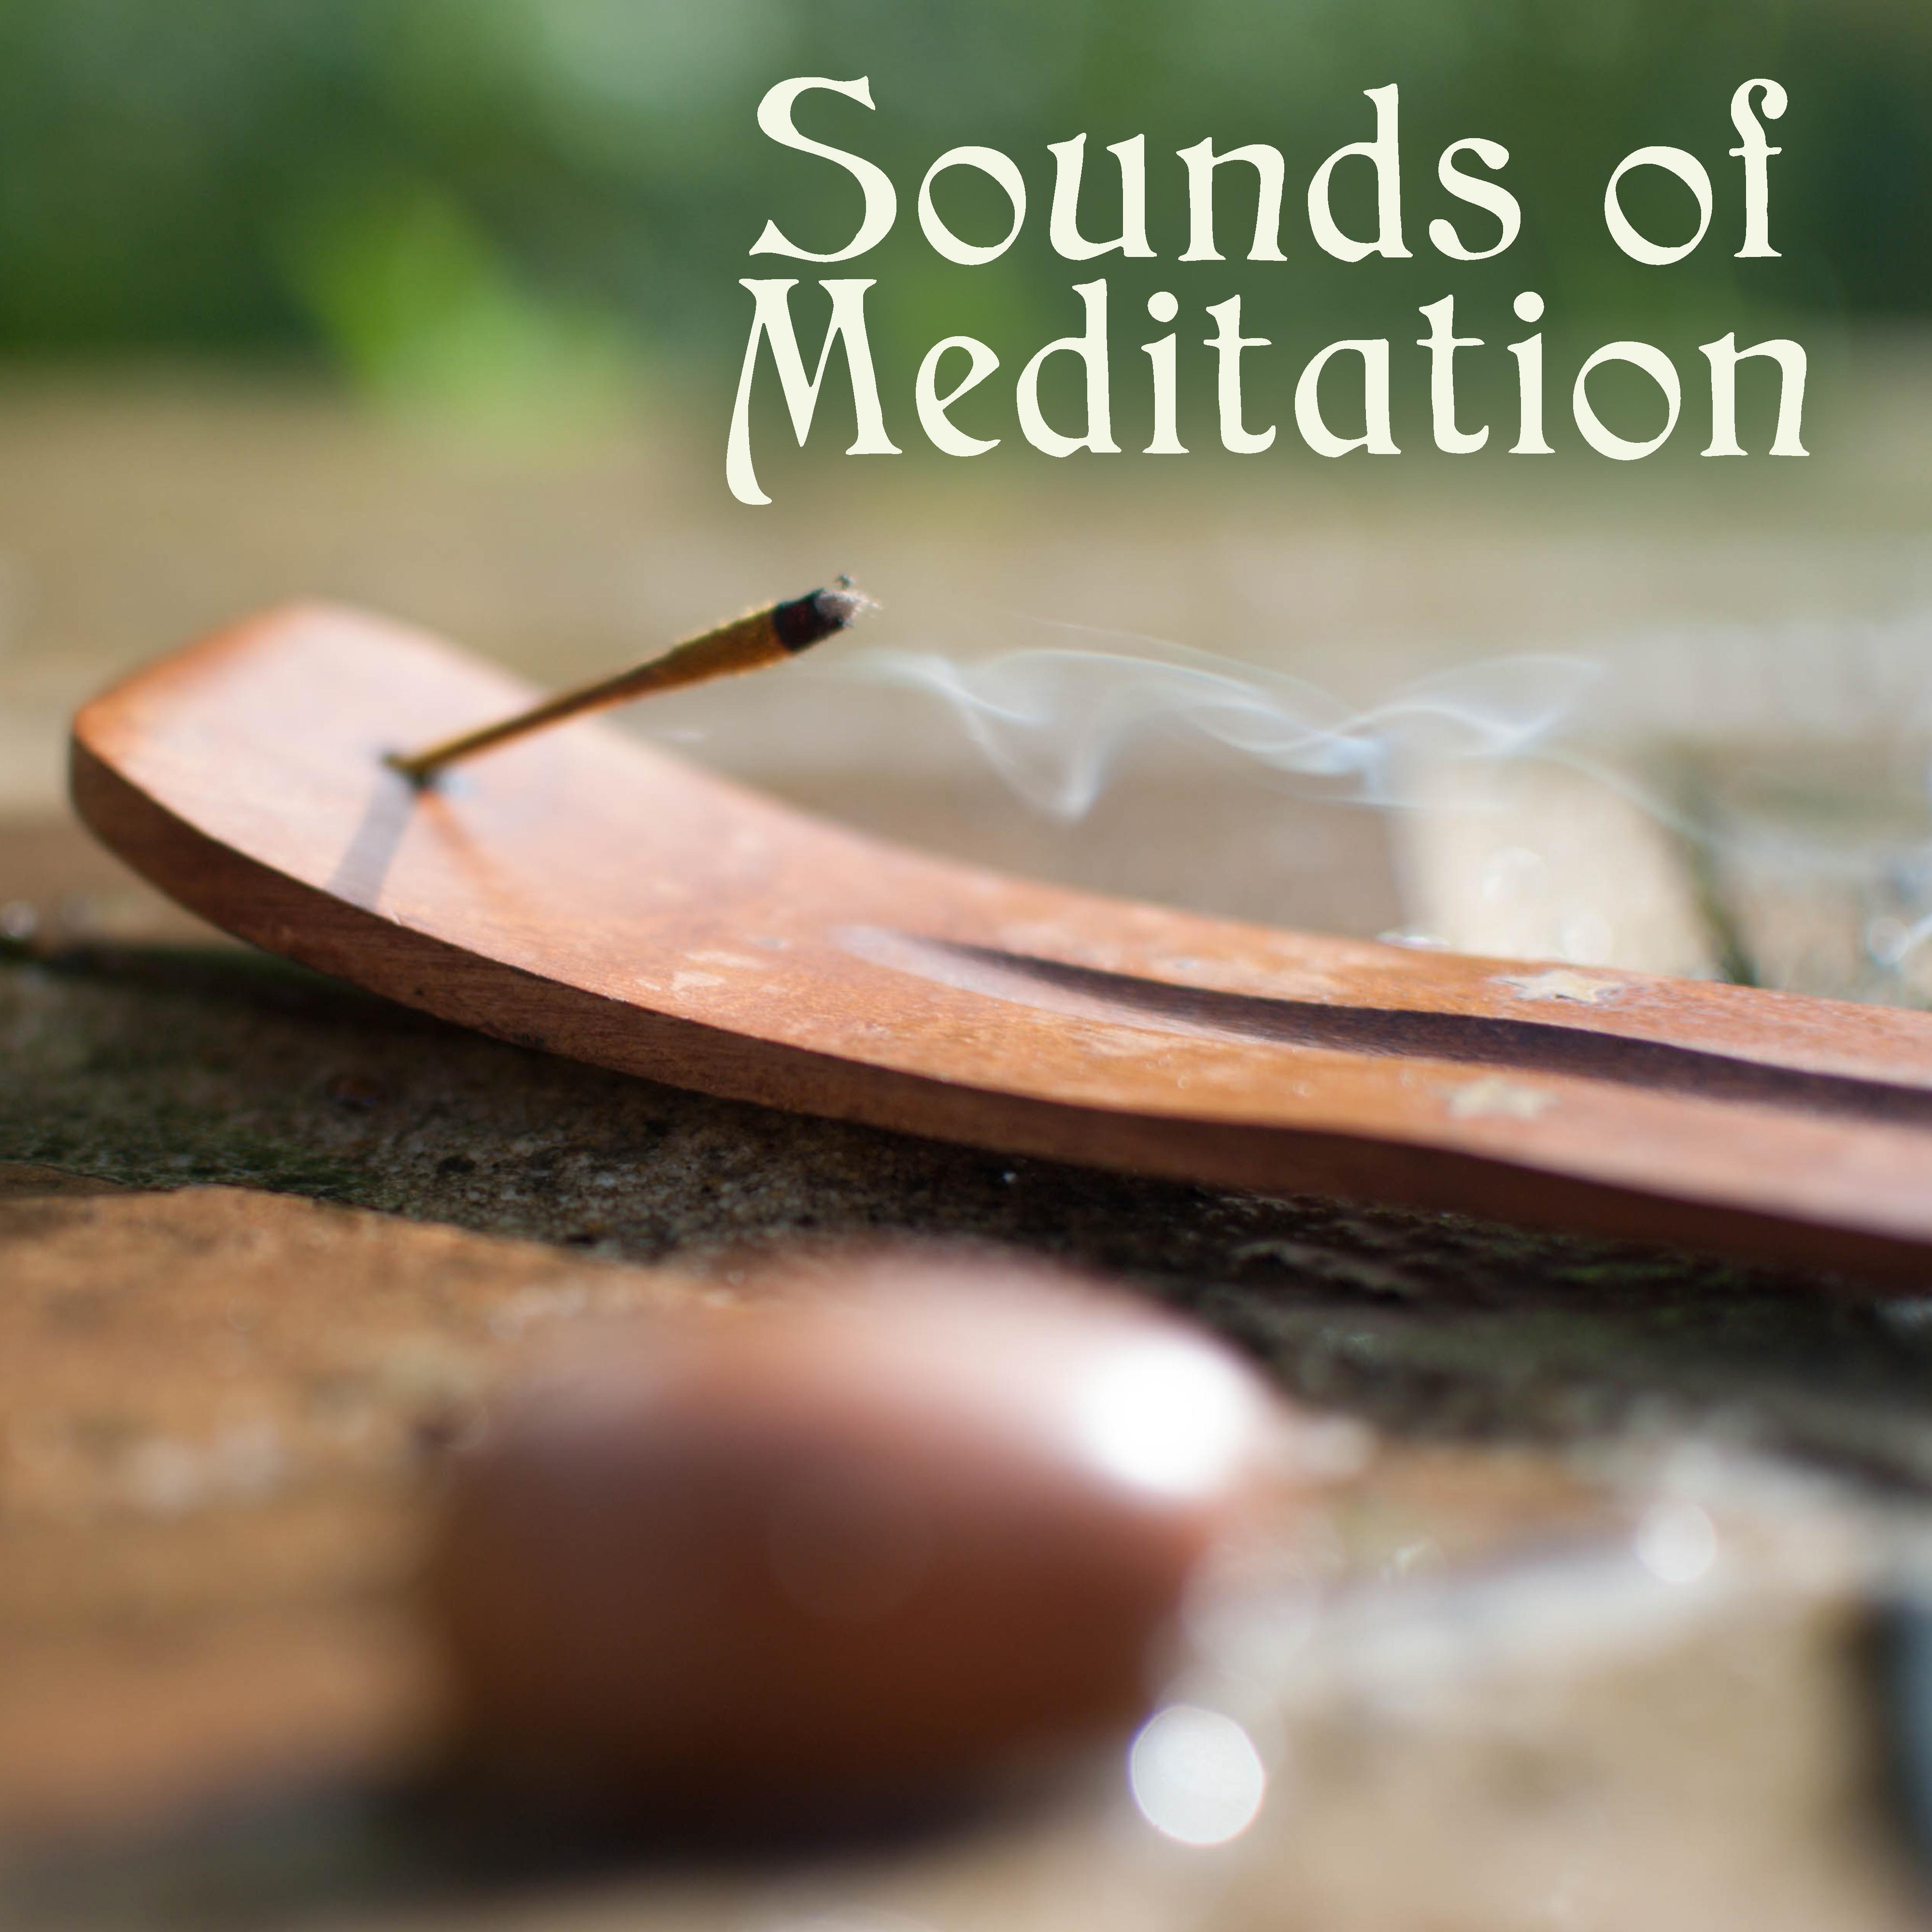 Sounds of Meditation – Yoga Music, Inner Zen, Calm Down, Peaceful Music for Deep Meditation, Tranquility